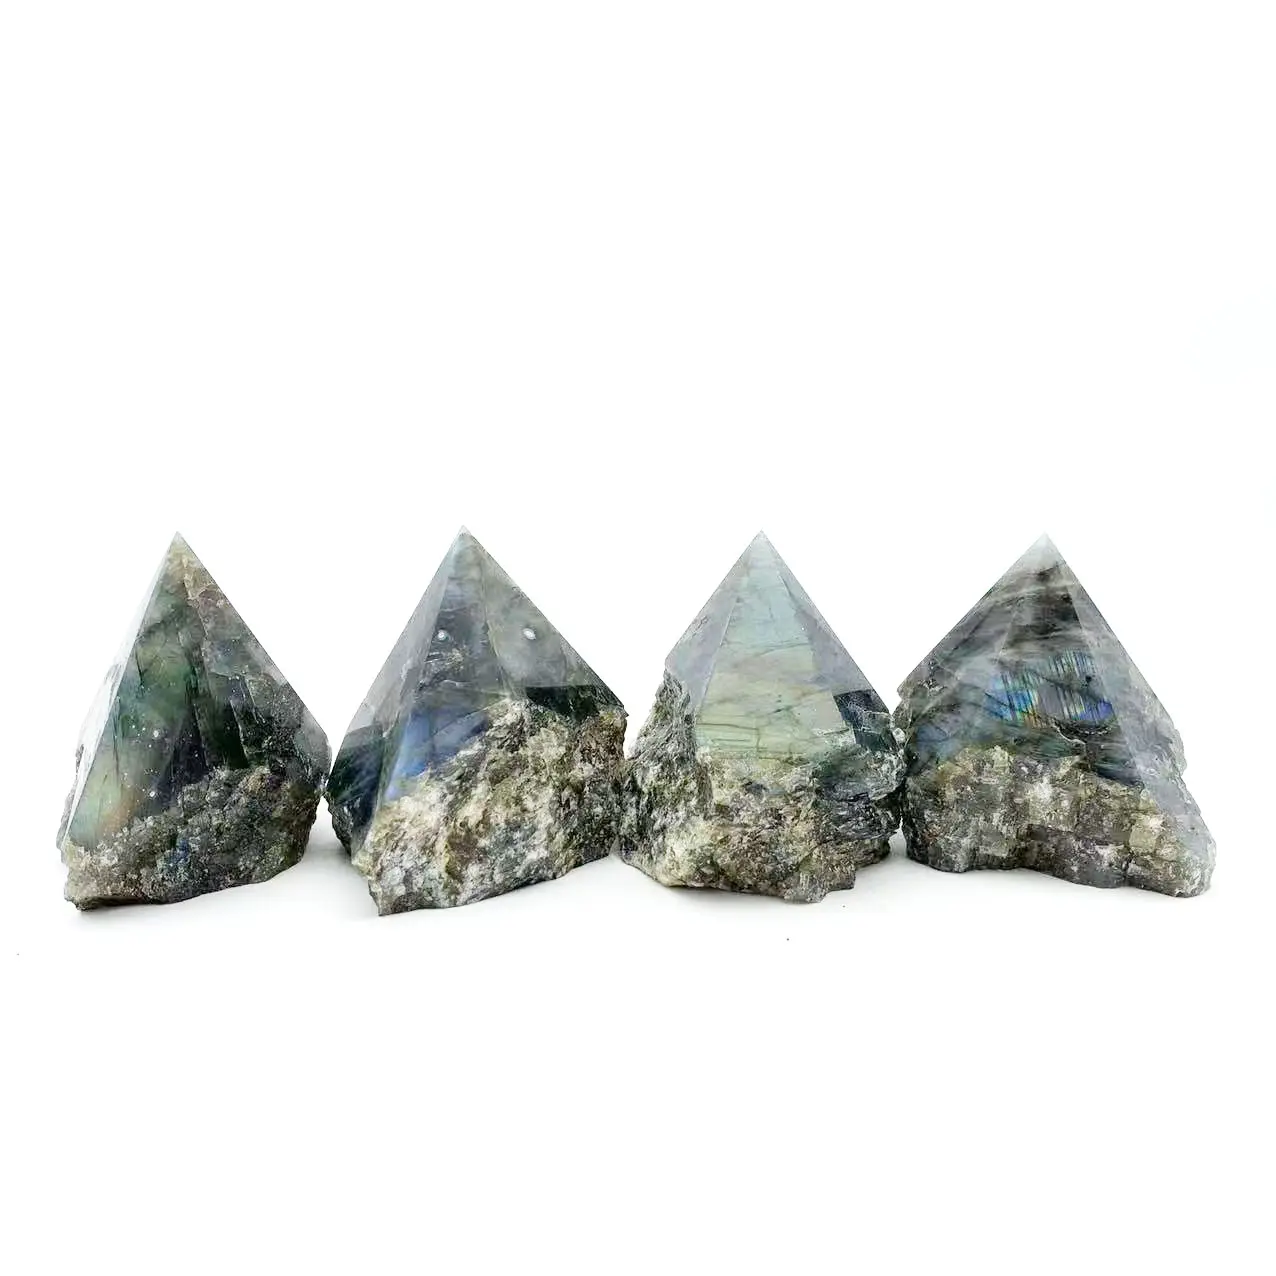 Hot High Quality Healing Crystals Wands Polished Labradorite Rough Stone Points Crafts For Decor